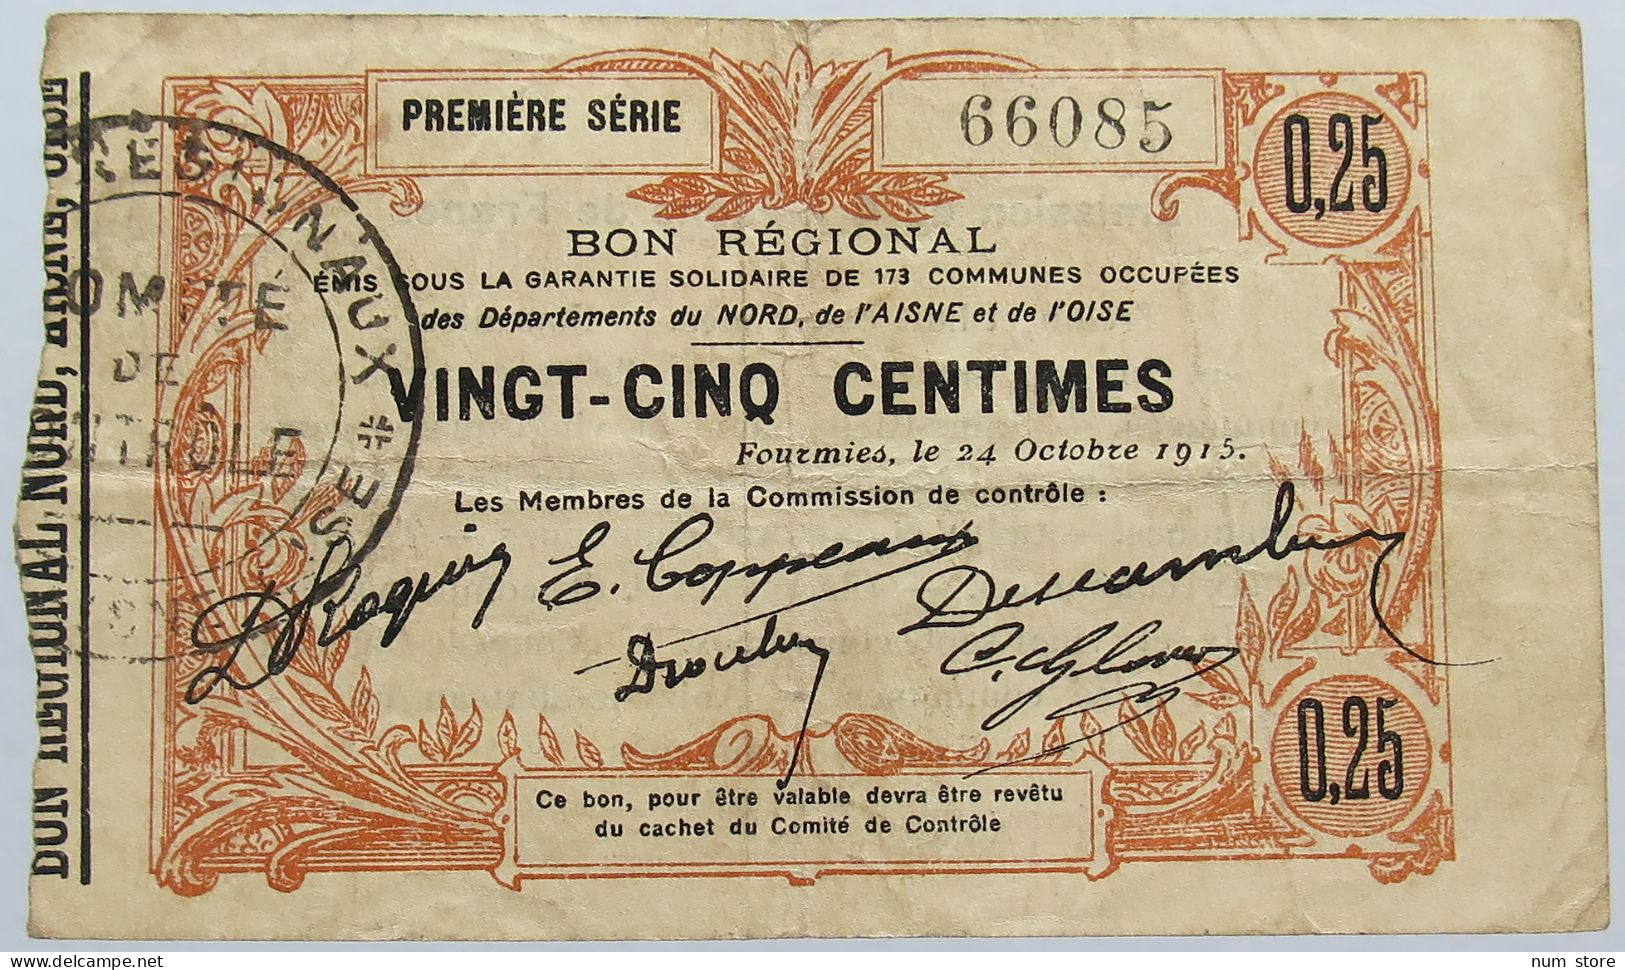 FRANCE 25 CENTIMES 1915 #alb004 0365 - Unclassified